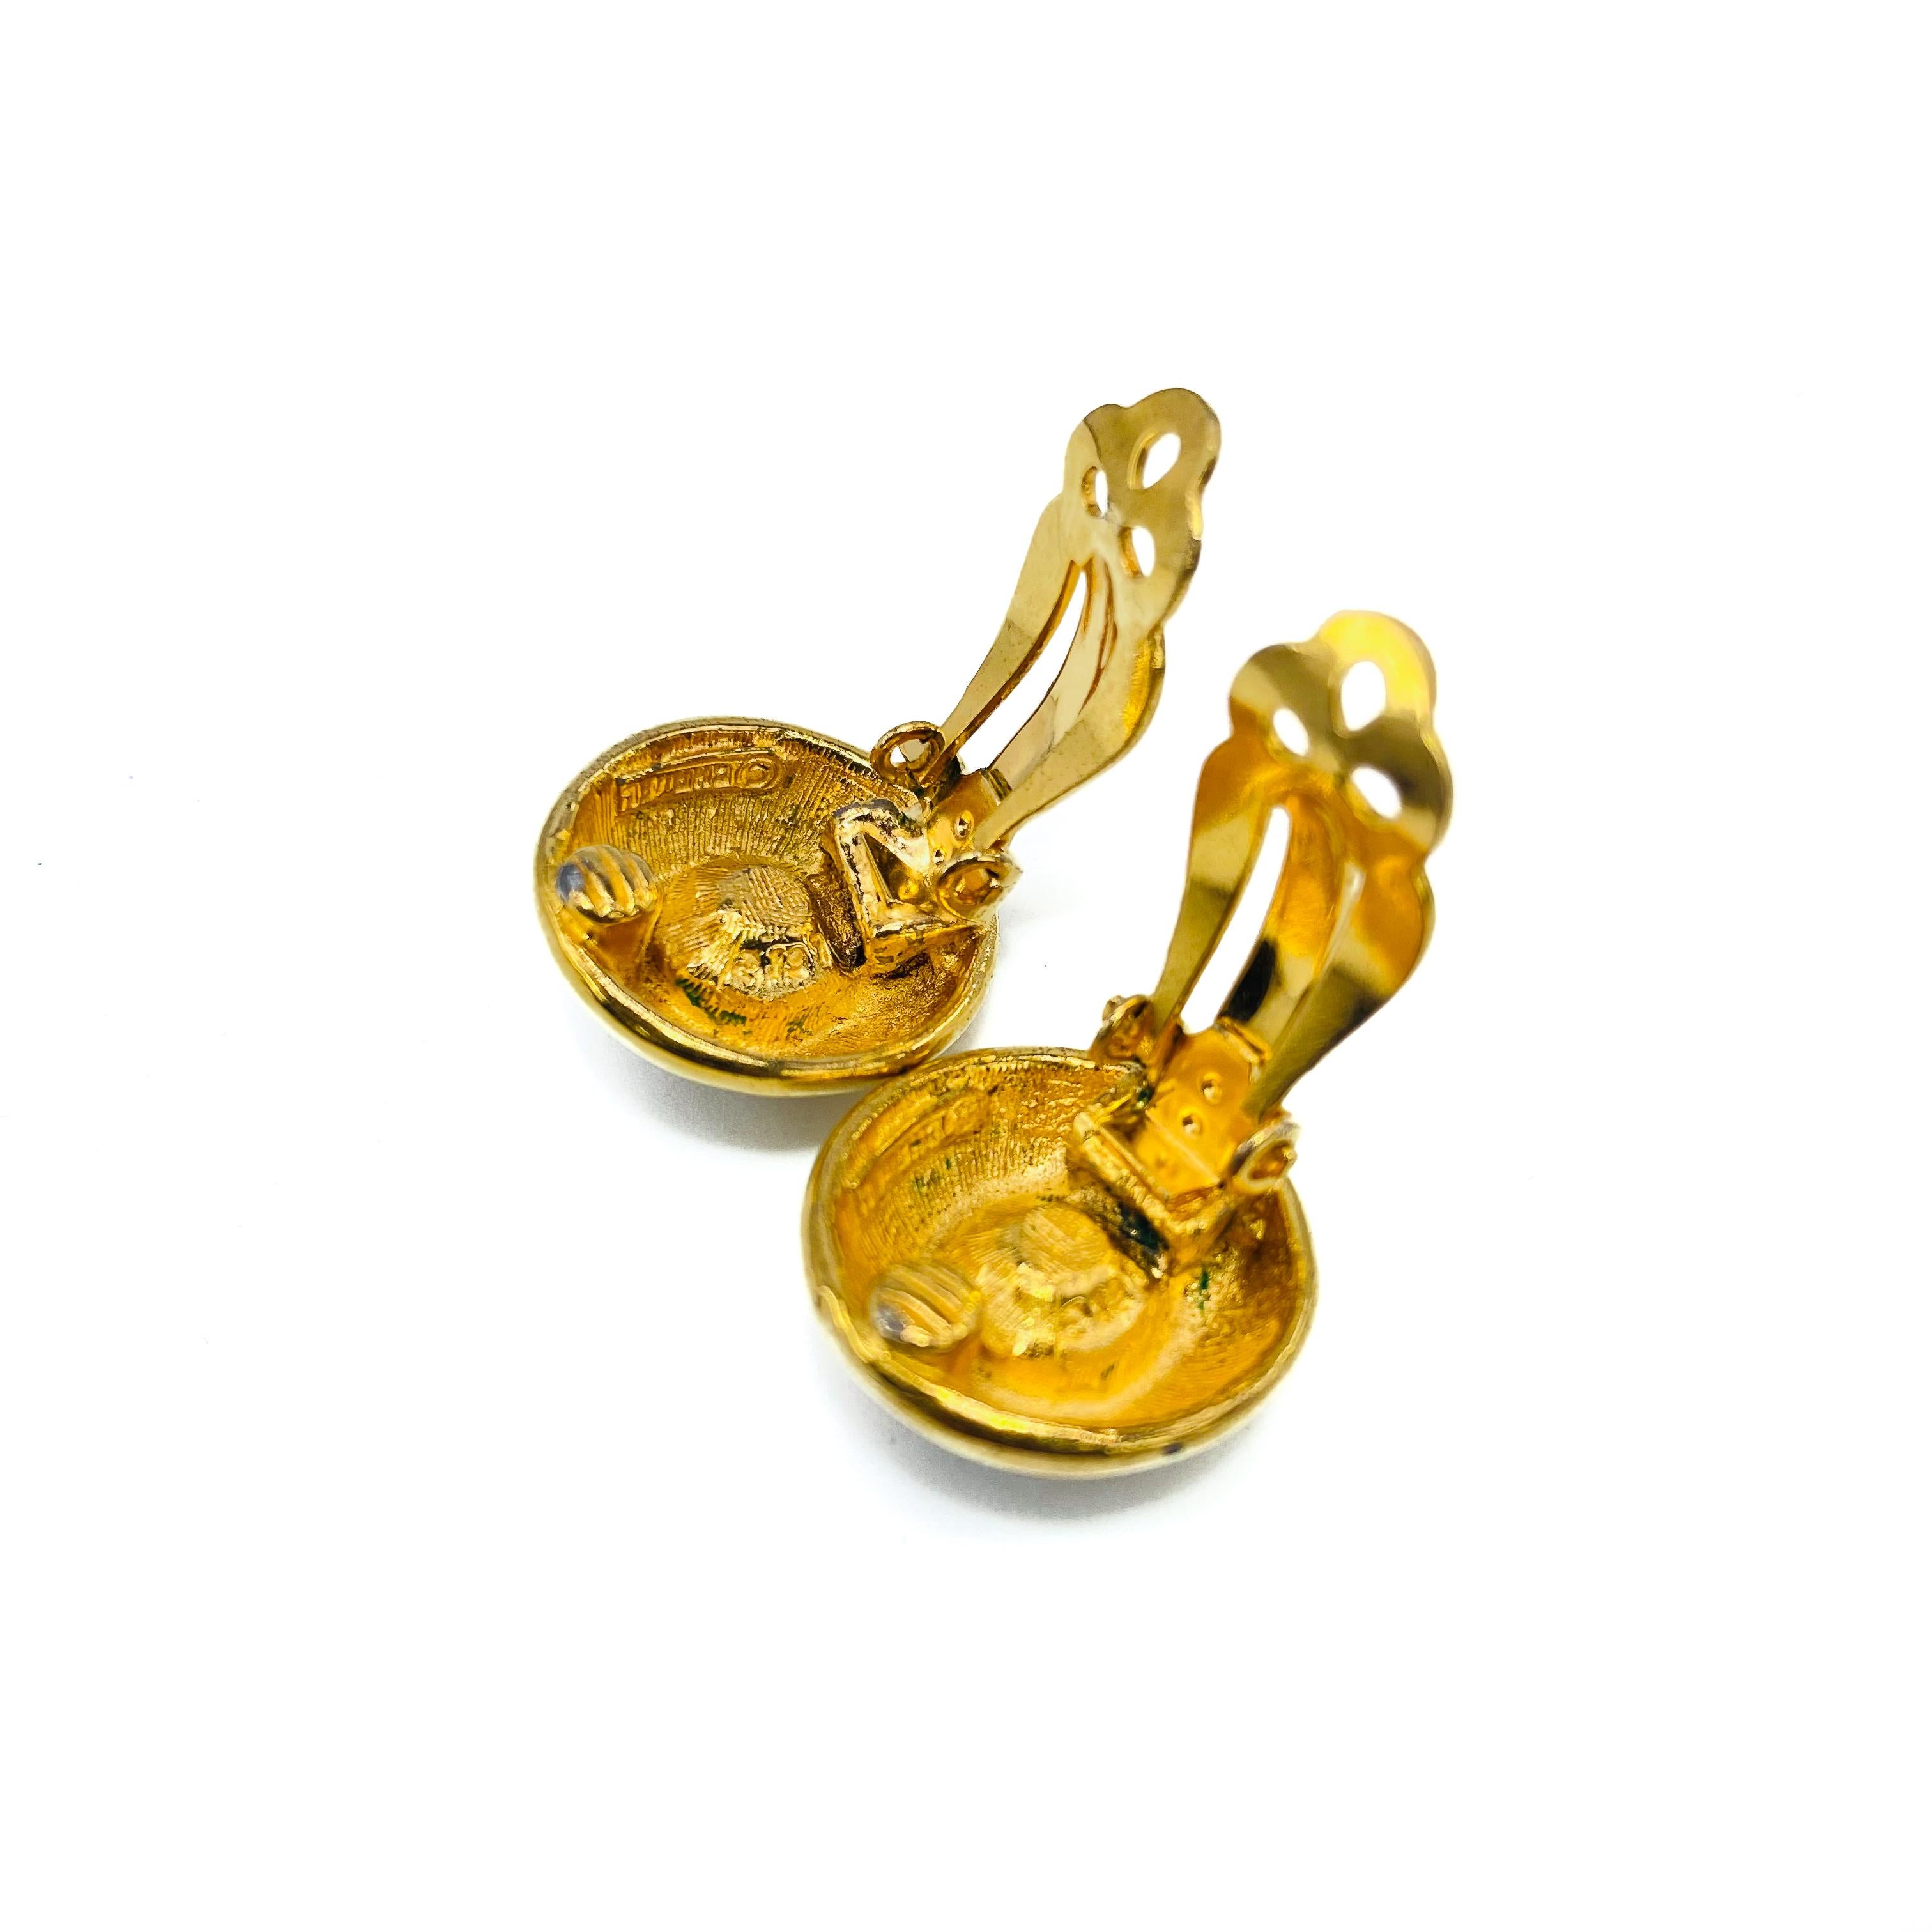 Chanel Vintage 1970s CC Earrings 

Beautifully timeless clip on earrings from Chanel - still the most desirable fashion house in the world

Detail
-Crafted from 24 Karat gold plated metal and set with a crystal
-Features the CC chanel logo
-Made in